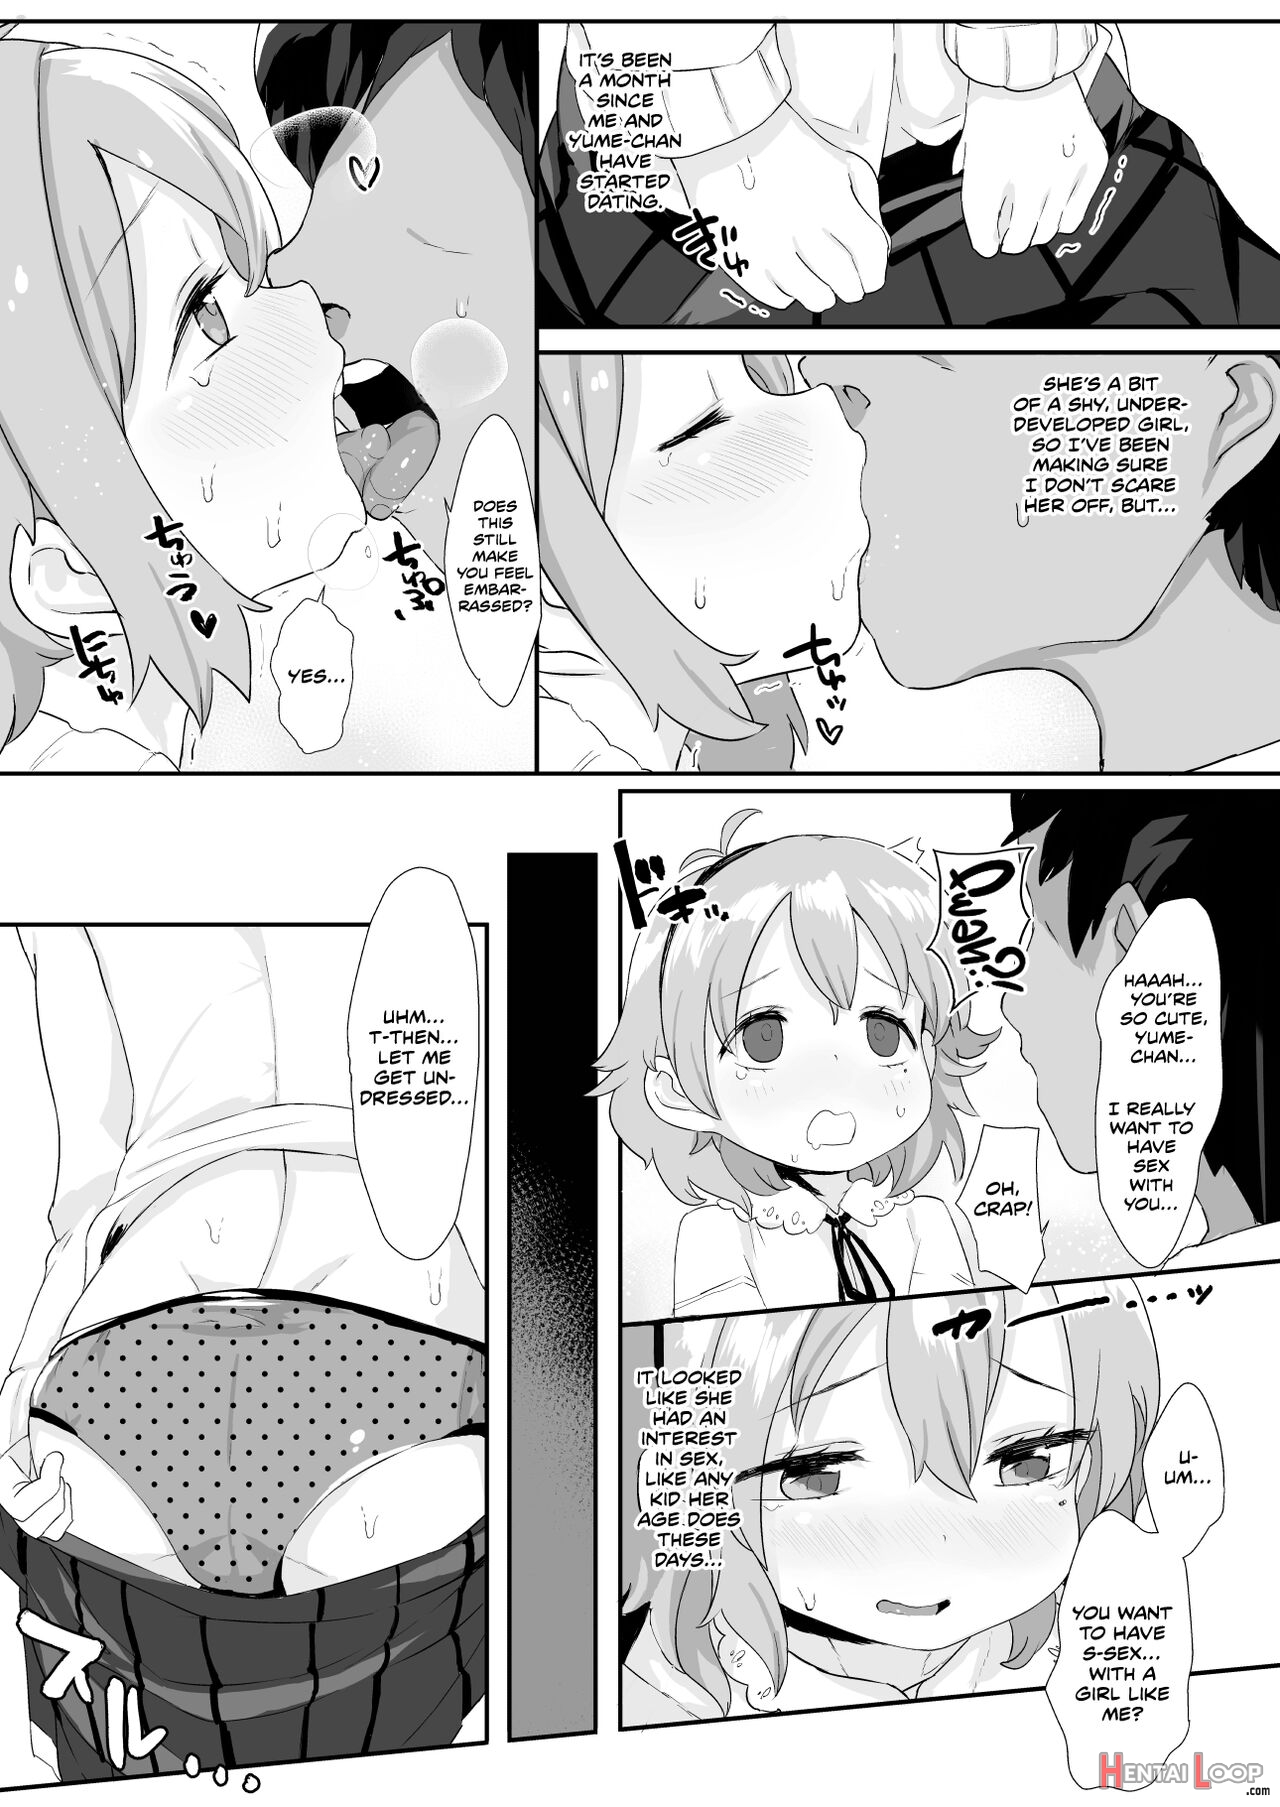 Hot 'n Steamy Babymaking Sex With Yume-chan! page 5